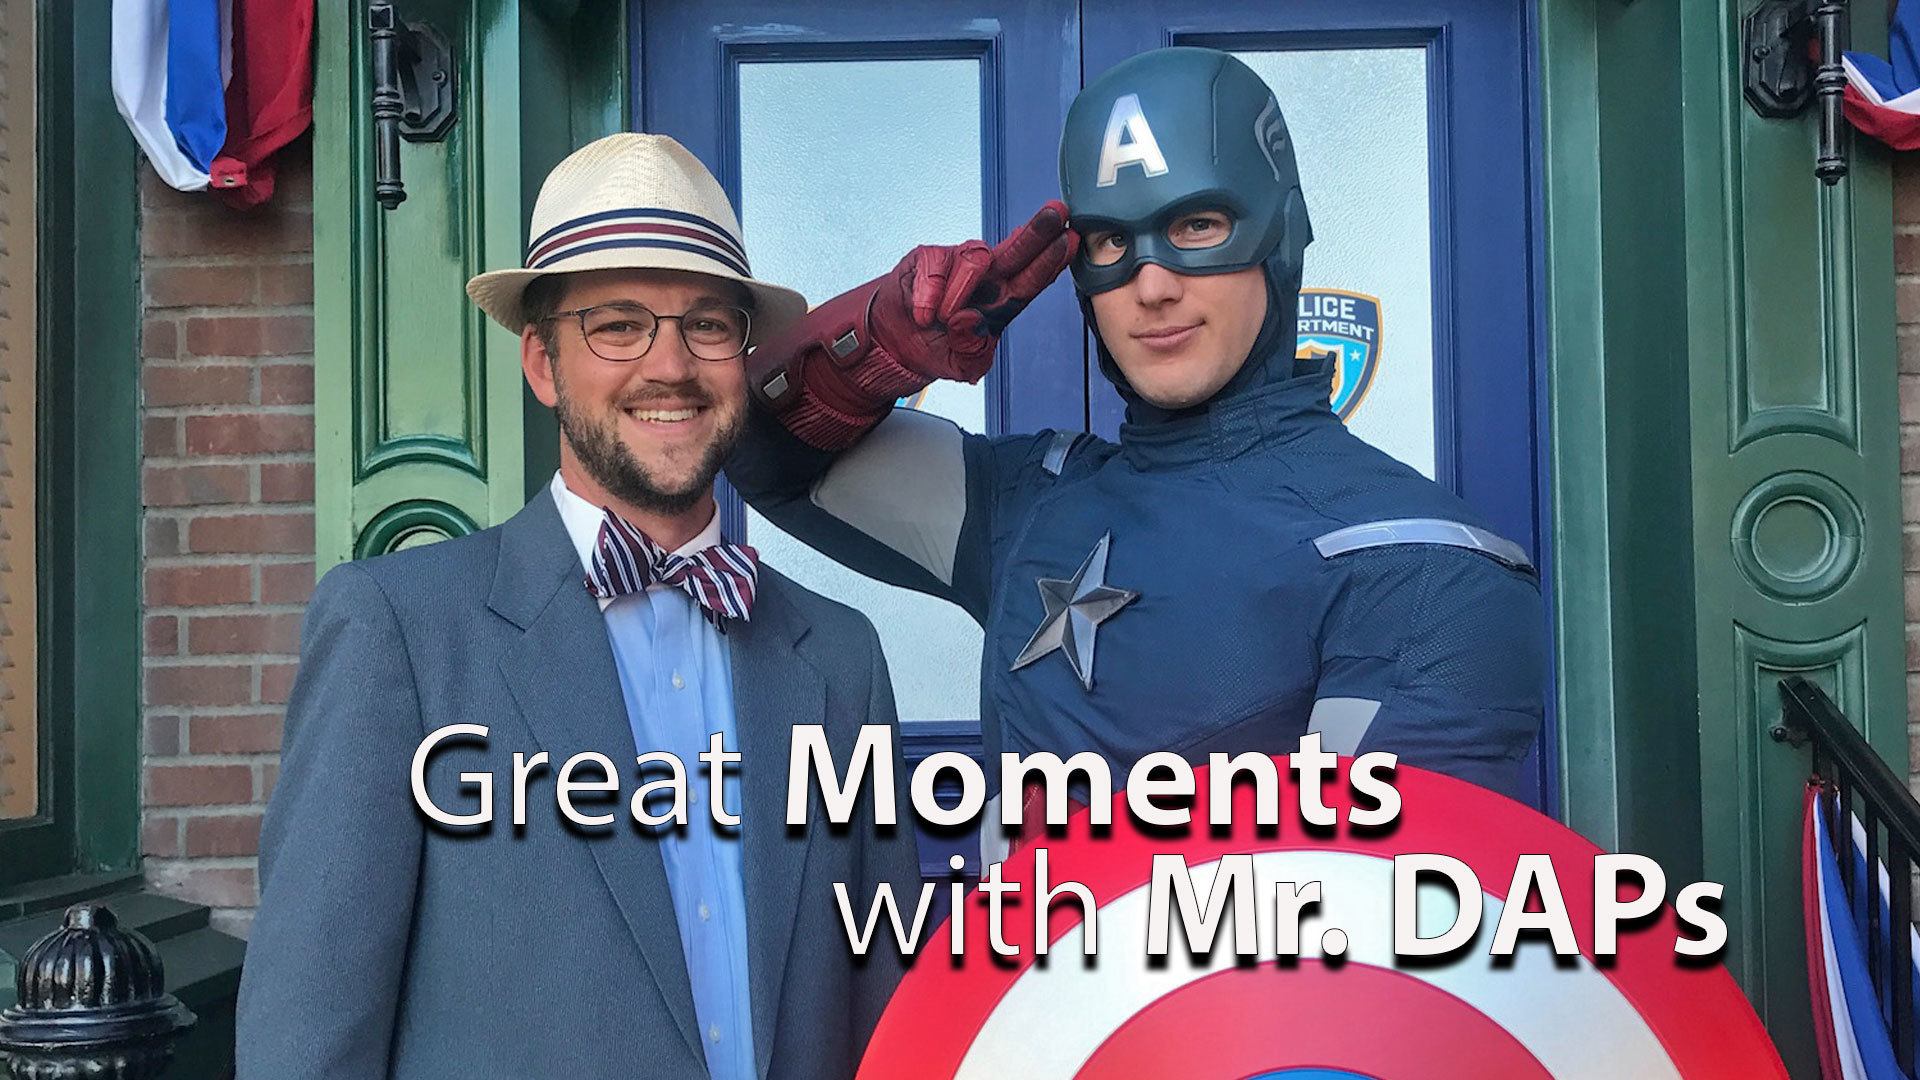 DuckTales, Star Wars: Galaxy’s Edge, and CHOC – Great Moments with Mr. DAPs